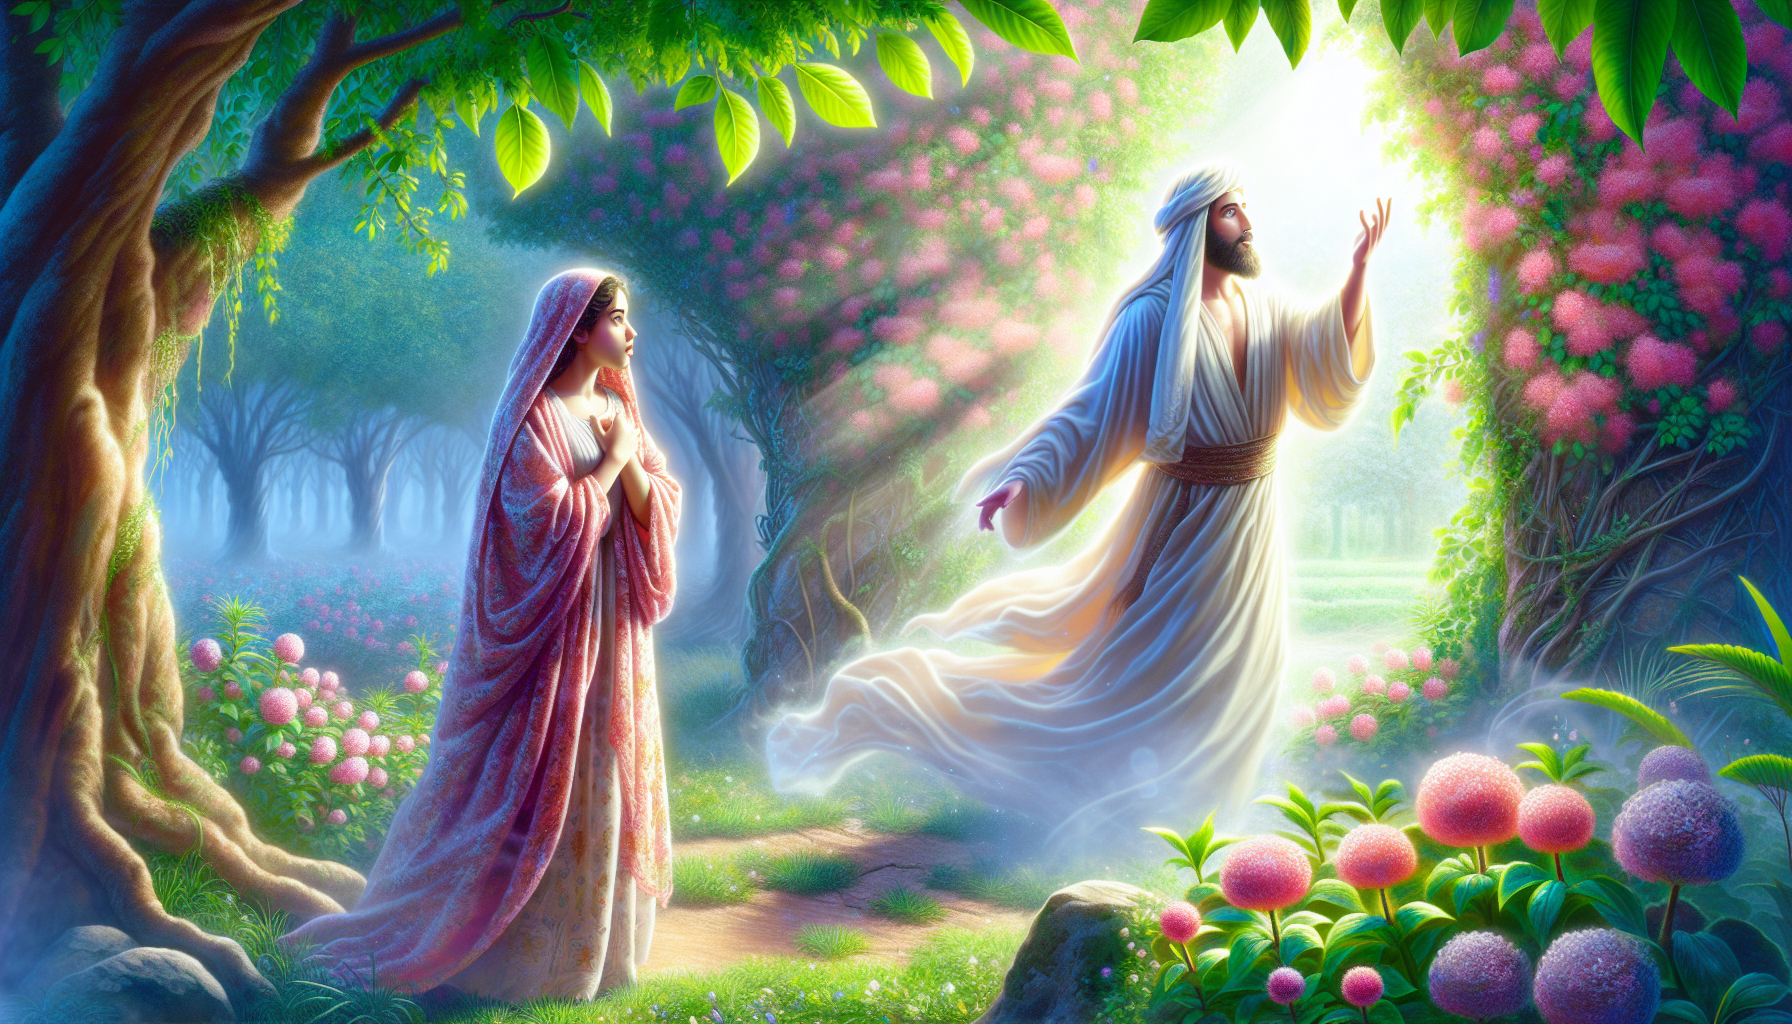 Create an image of the first appearance of the resurrected Jesus, depicting the moment when he reveals himself to Mary Magdalene in the garden after his resurrection, captured in a serene and spiritua